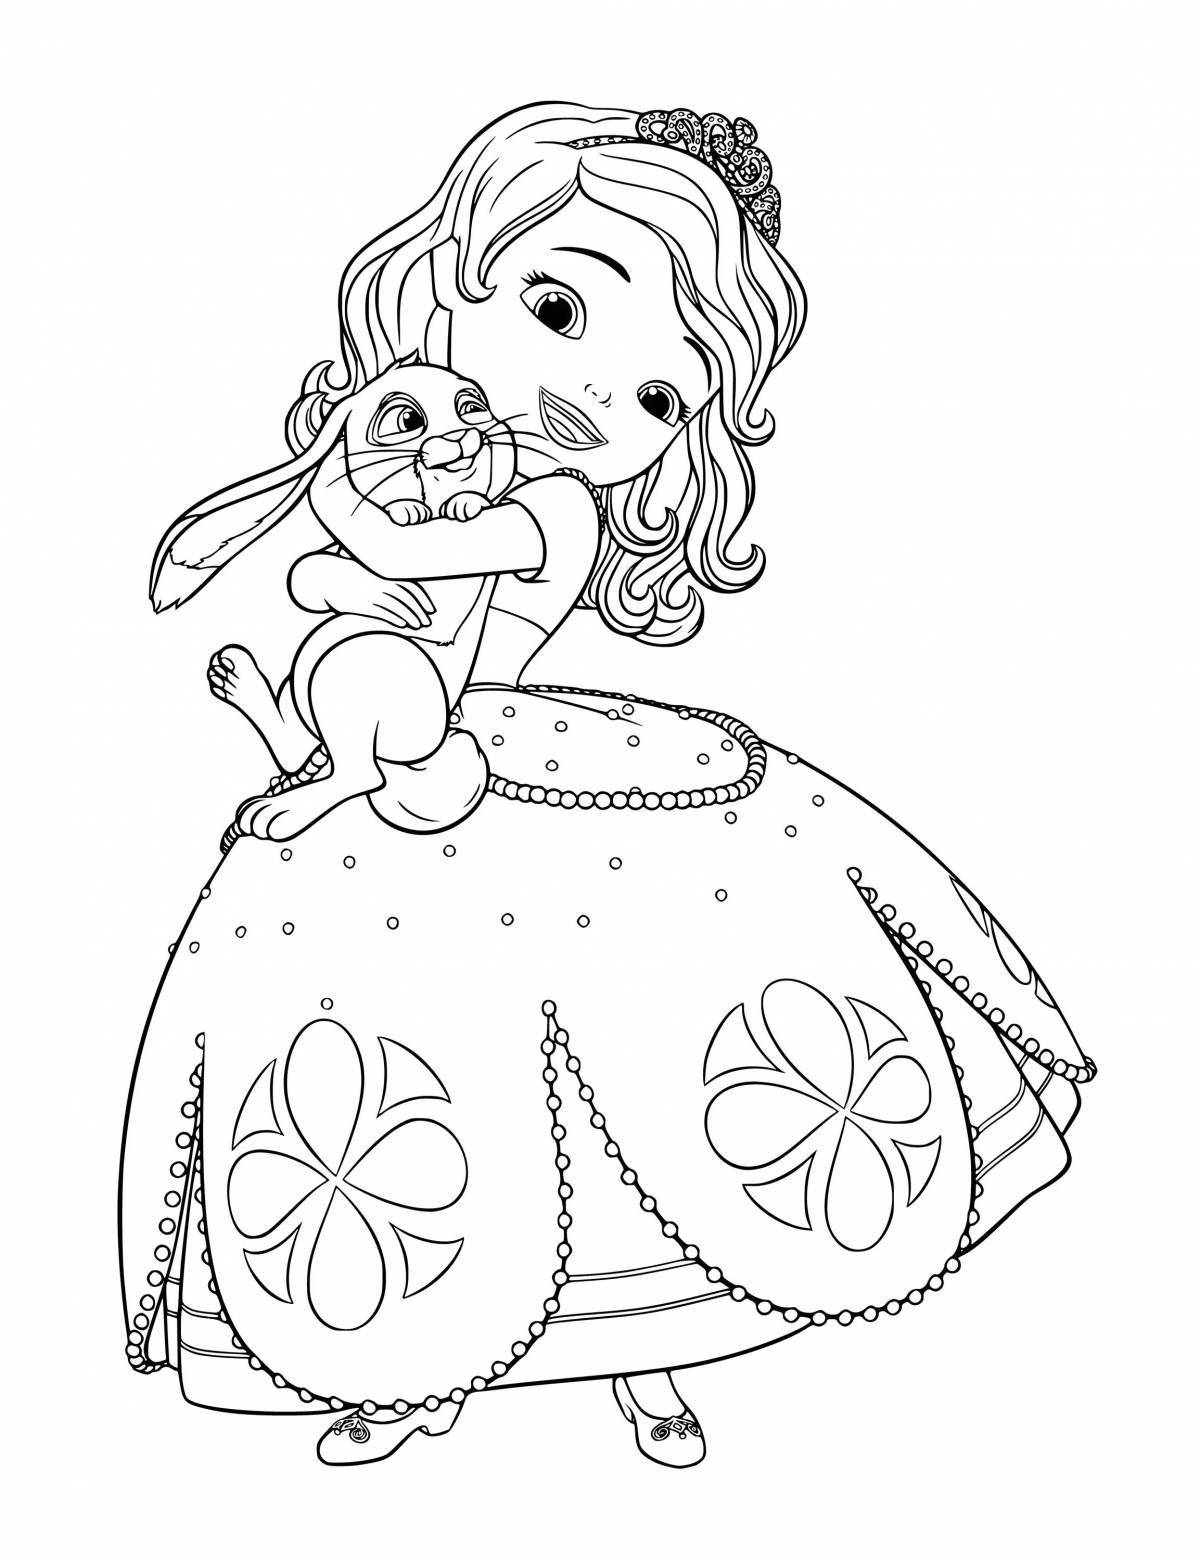 Cute yandex coloring book for girls